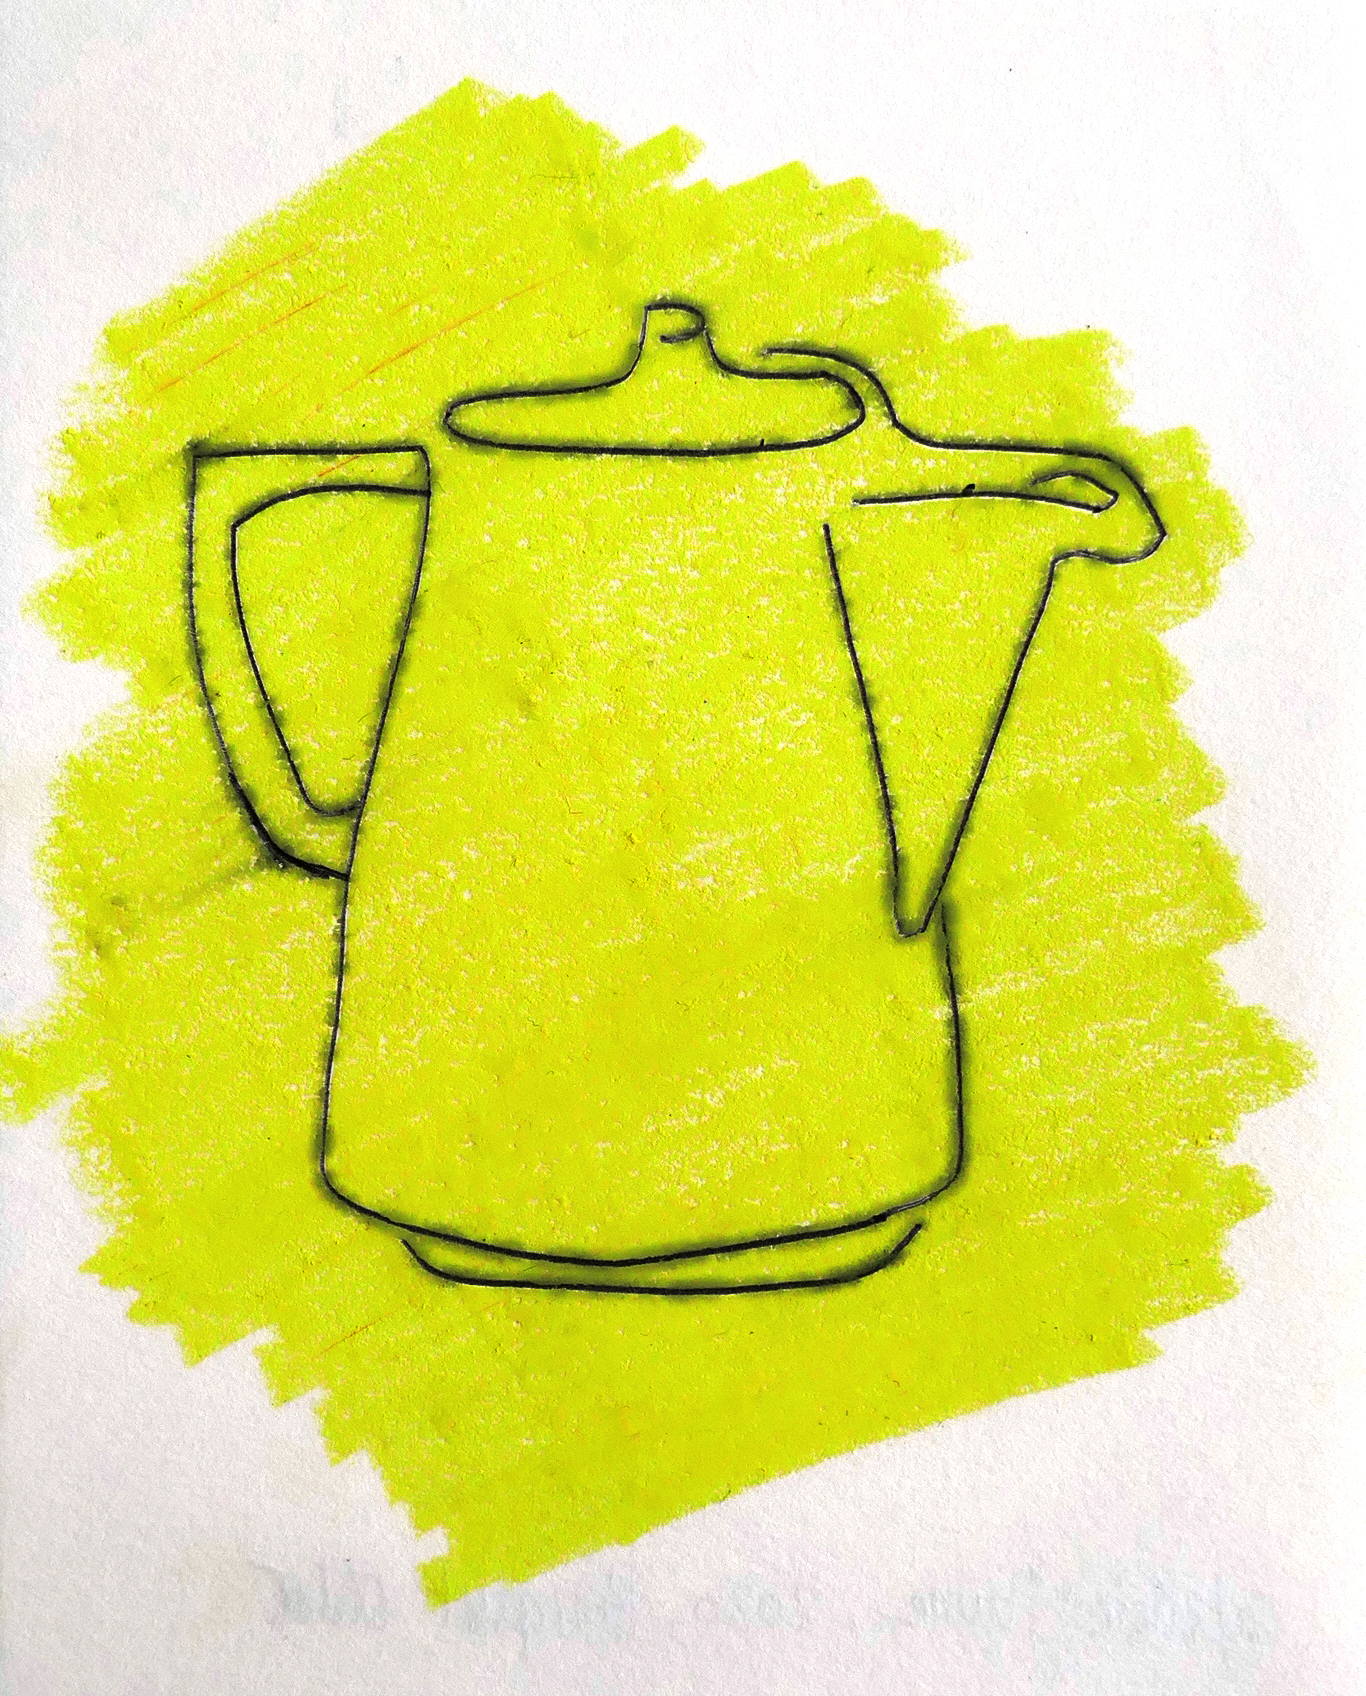 Jaune cafetière, 2019, pastel and ink on paper, 14,5x12 cm